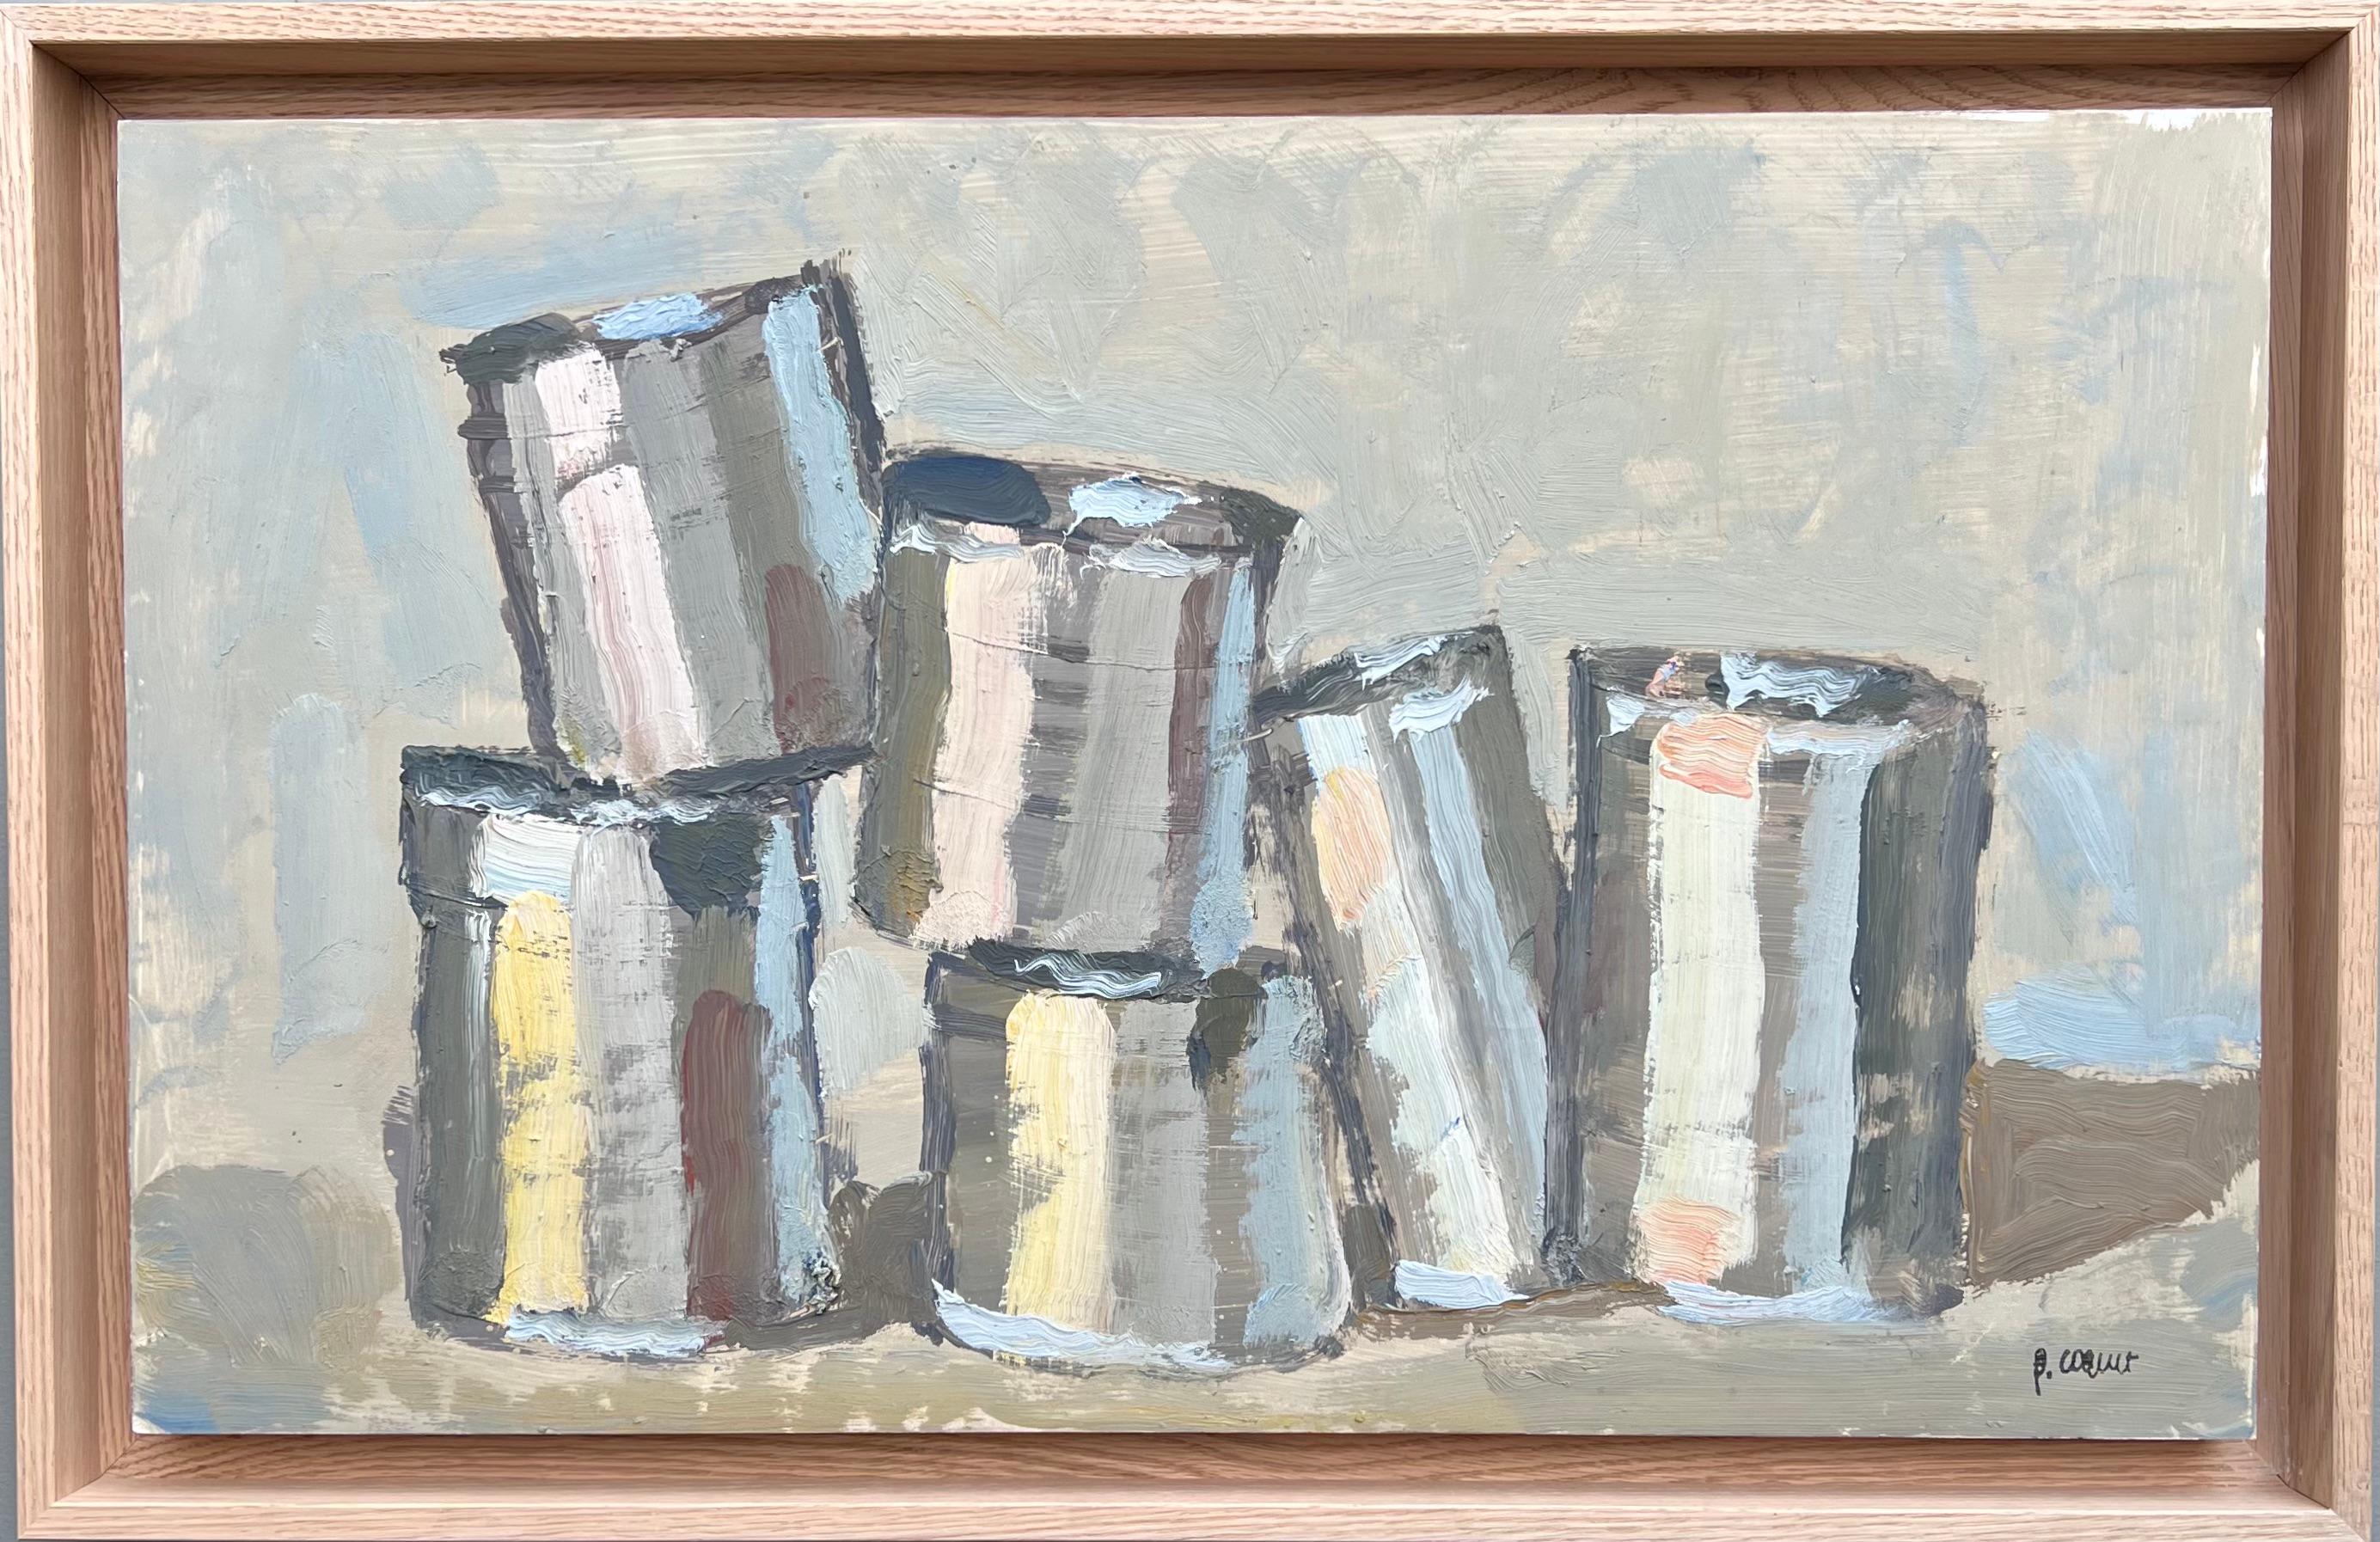 Pierre Coquet - Tin cans
Reference number F455
Framed with a natural oak floated frame
35 x 40 cm frame included (30 x 35 cm without frame)
This work is painted with oil on a paper that is mounted on a board and placed in a made to measure wood